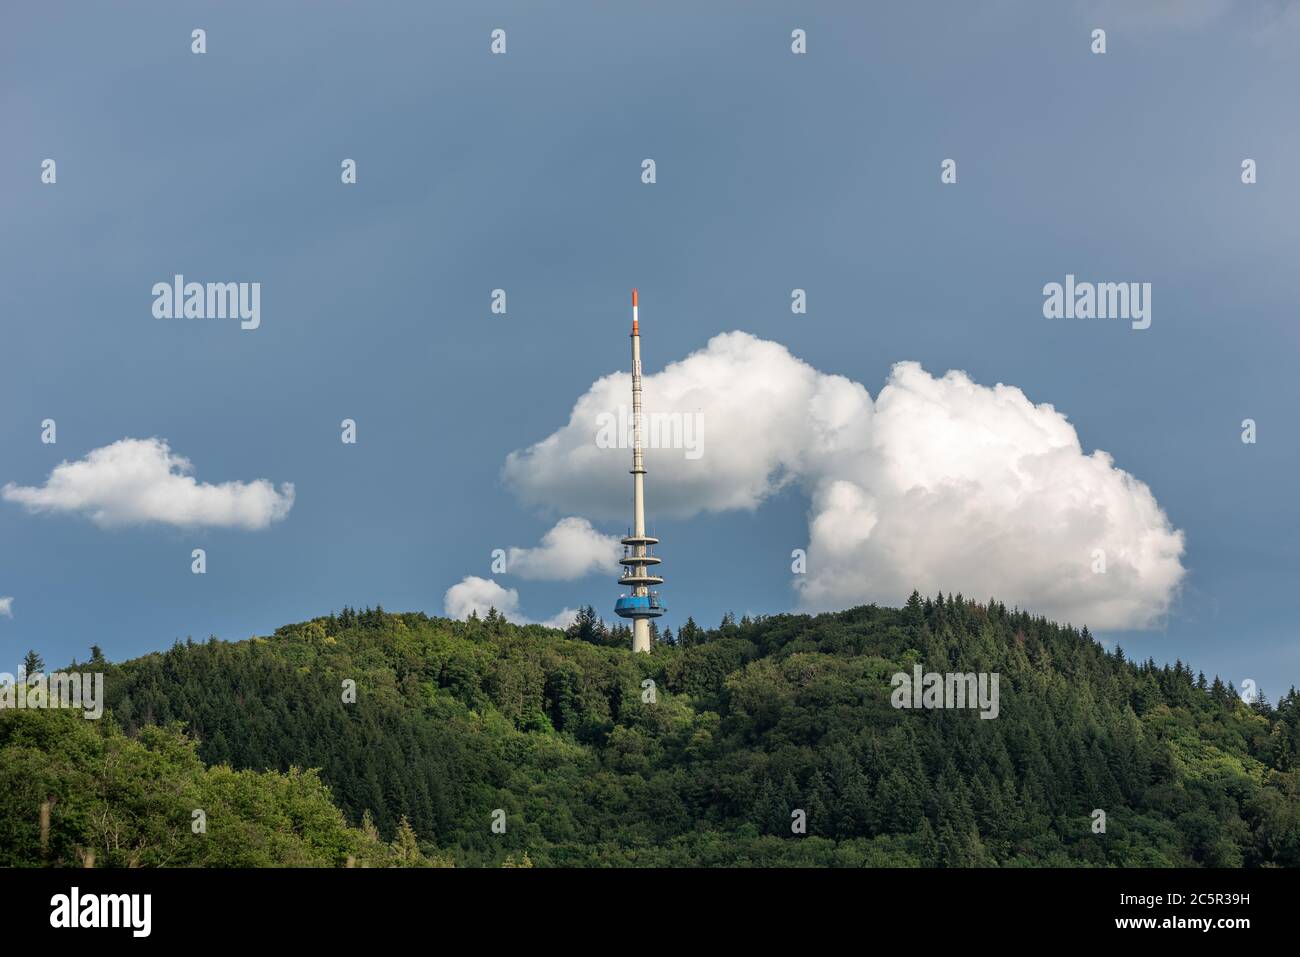 Telecommunication tower on an extinct volcano in the Kaiserstuhl range in Germany Stock Photo